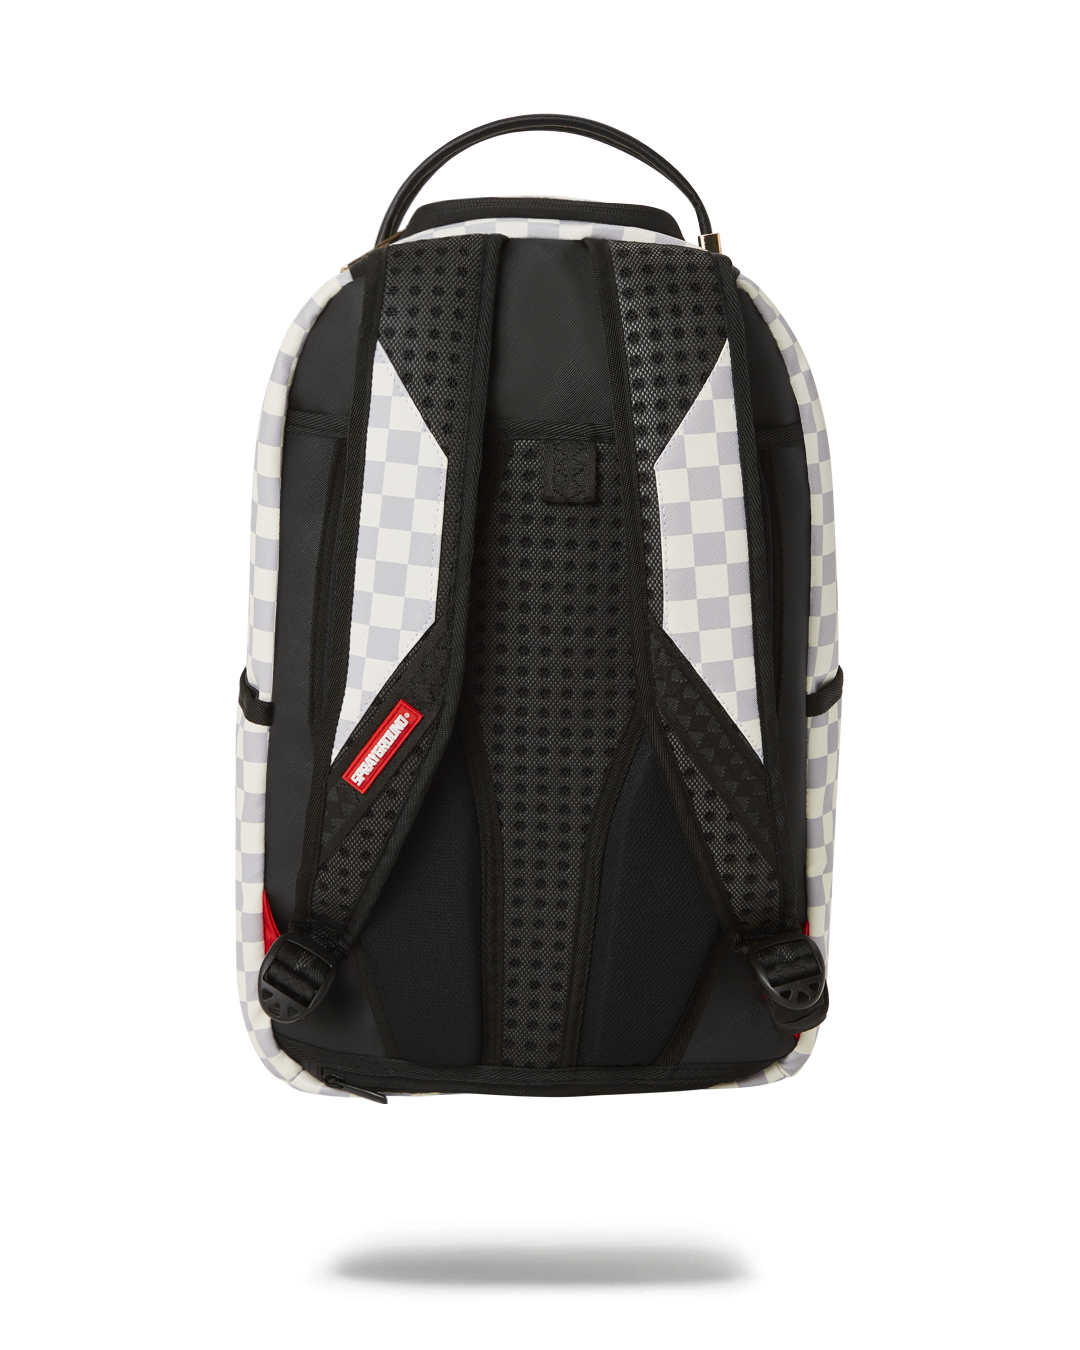 SPRAYGROUND DIABLO VILLIAN BROWN CHECKED BACKPACK NEW IN BAG w/ TAGS